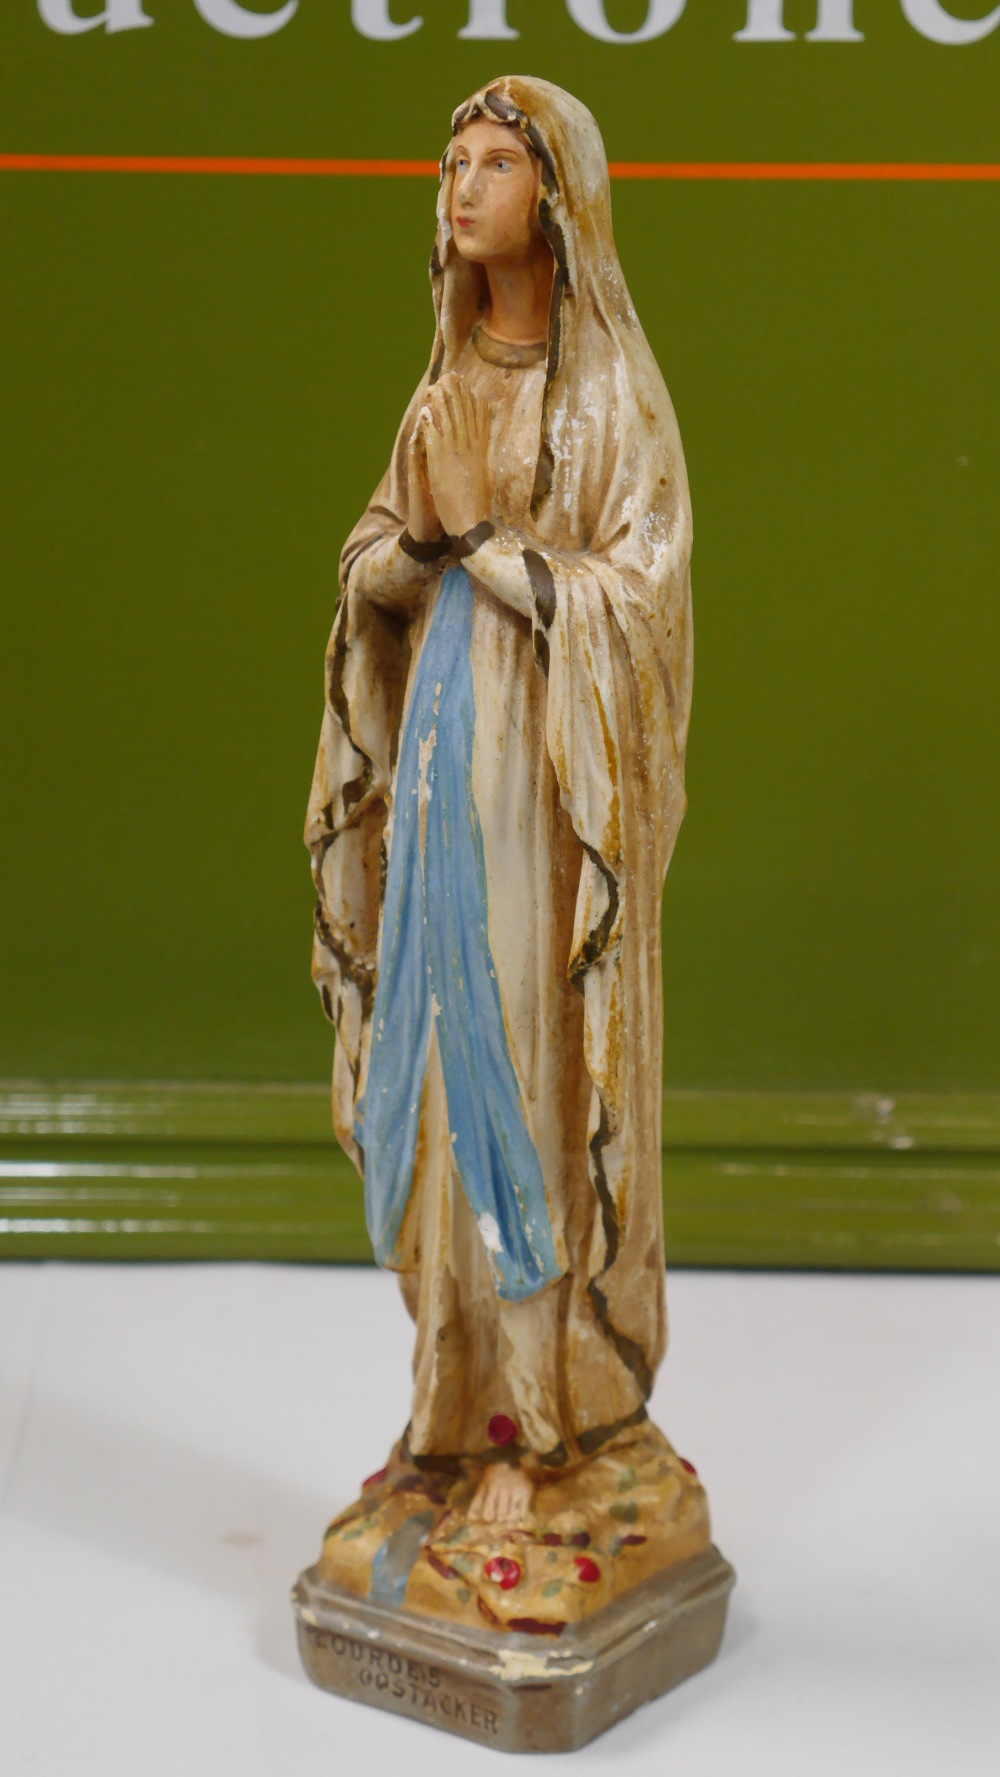 Virgin Mary Our Lady of Lourdes Oostakker Bisque Porcelain Religious Statue - Image 3 of 7